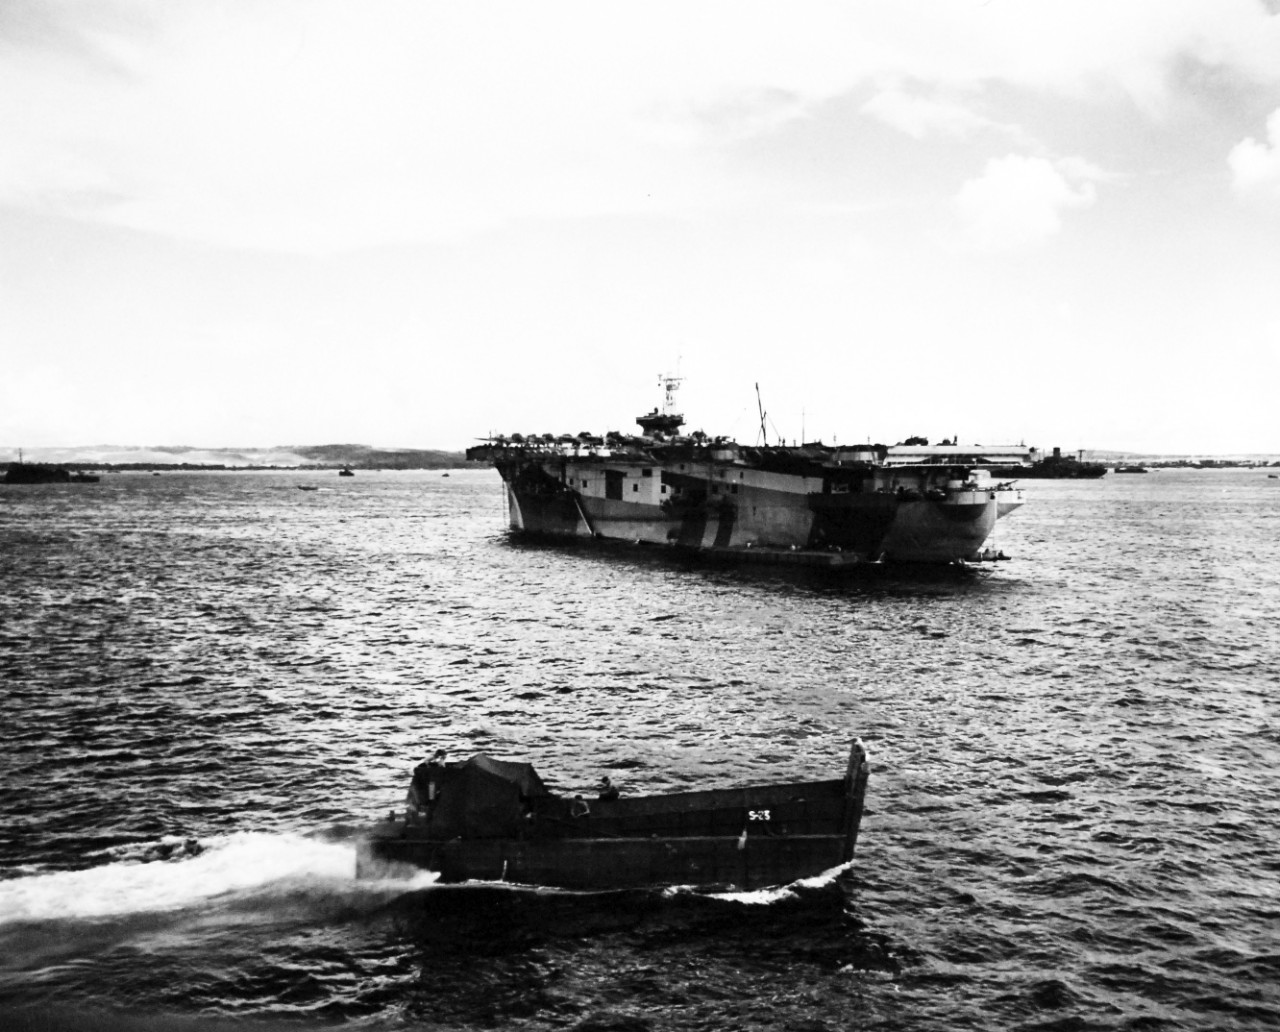 80-G-307714:  Invasion of Saipan, June-July 1944.  An LCT passing USS Rocky Mount (AGC-3) and a U.S. carrier loaded with Japanese planes off Saipan during the invasion, June 1944.      Official U.S. Navy Photograph, now in the collections of the U.S. Navy.  (2017/04/11).  